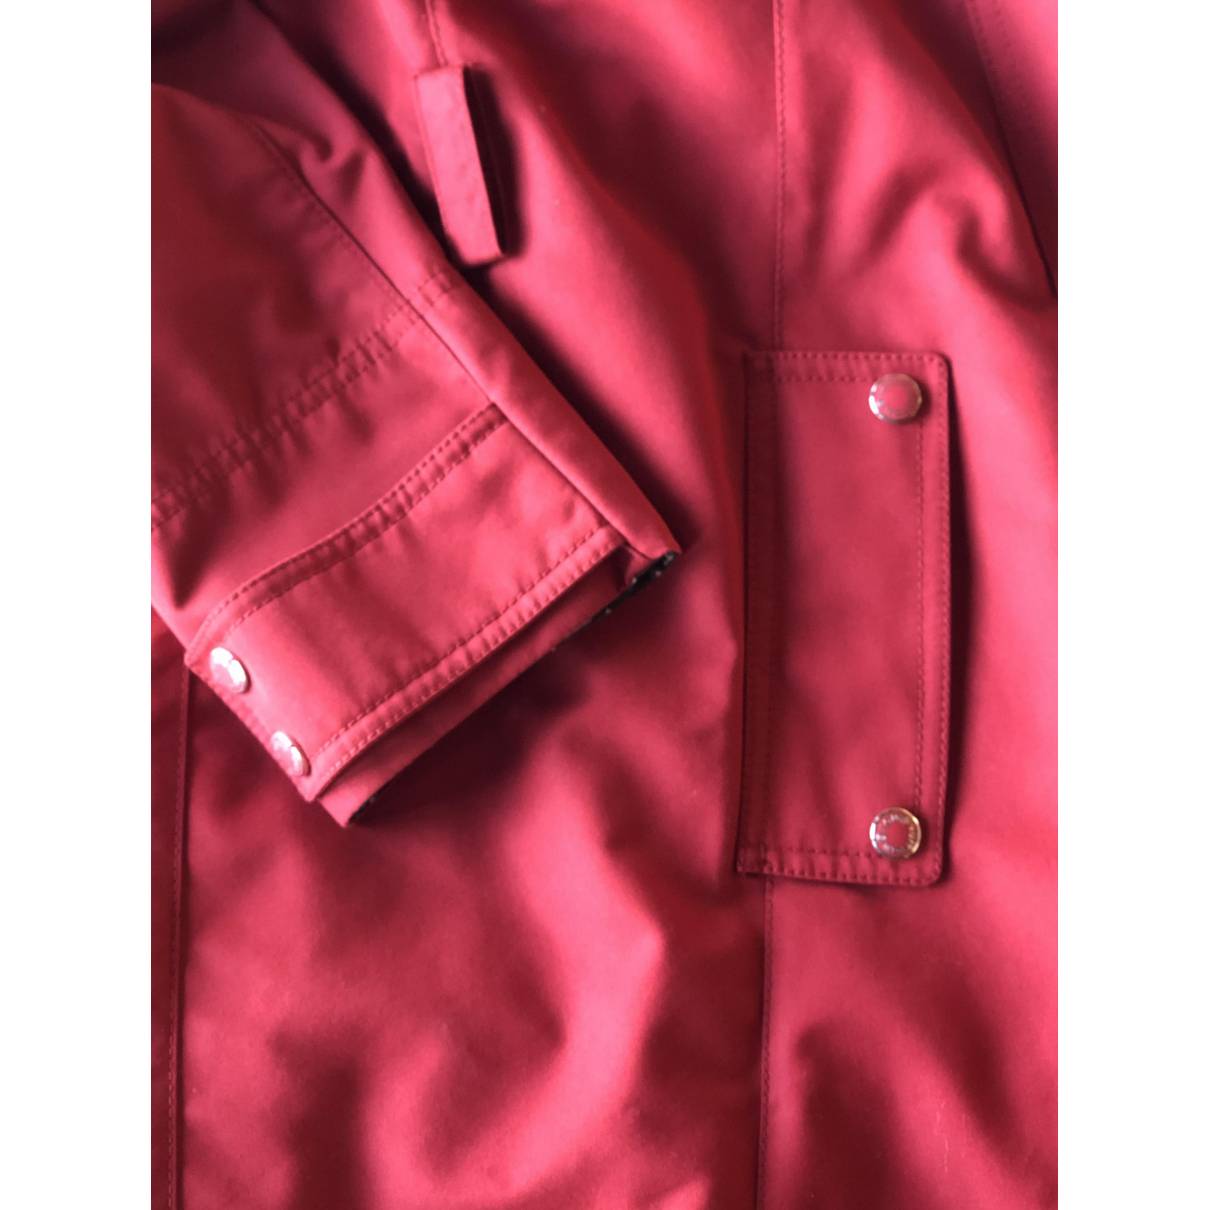 Louis Vuitton - Authenticated Trench Coat - Cotton Burgundy Plain for Women, Very Good Condition